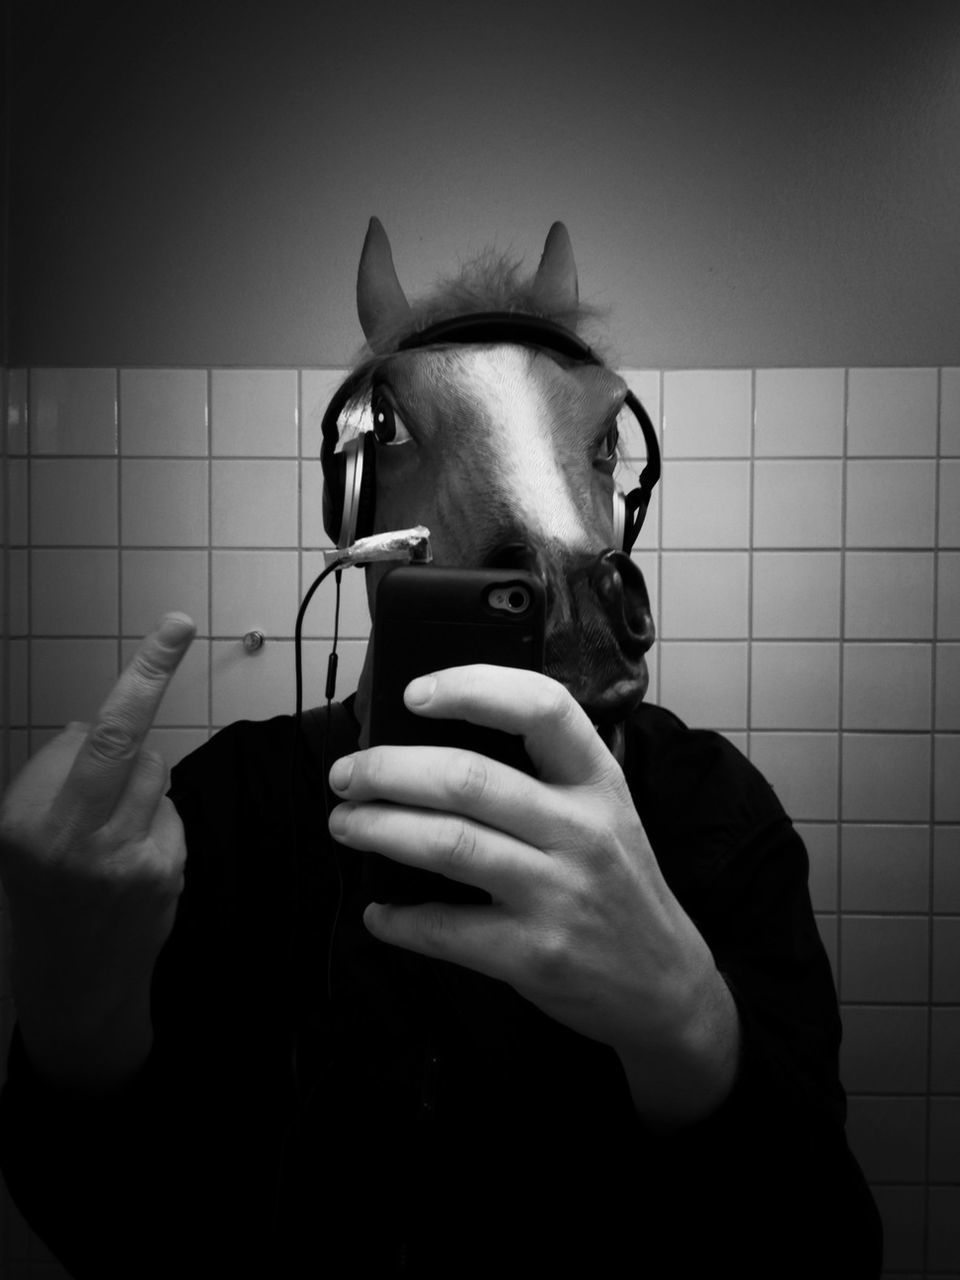 Man wearing horse mask and headphones gives middle finger